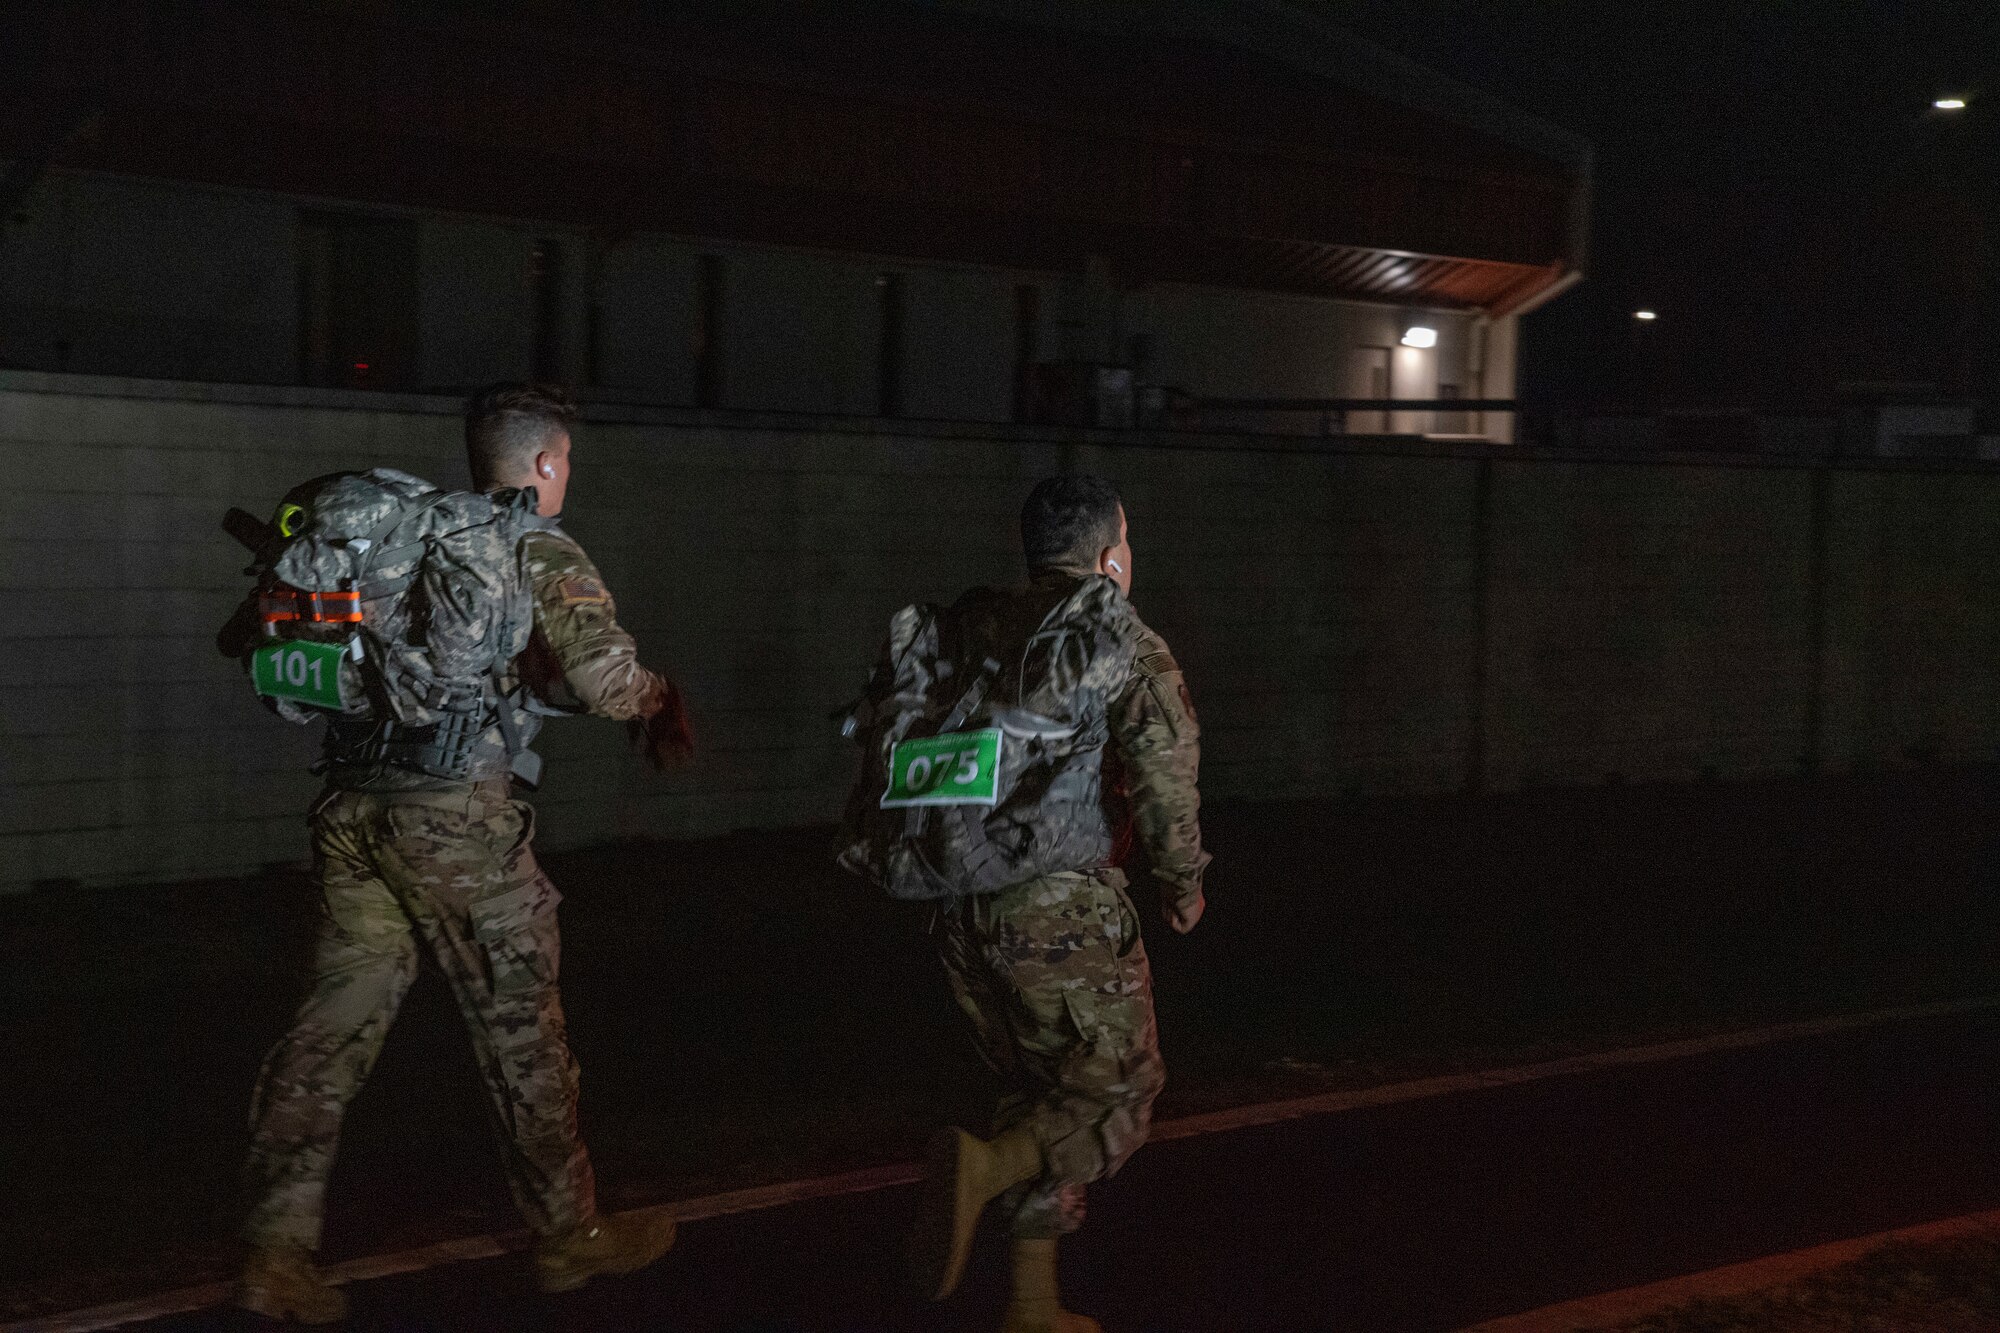 Two Joint Communications Support Element members finish the Norwegian Foot March on April 2, 2021, at MacDill Air Force Base, Fla.